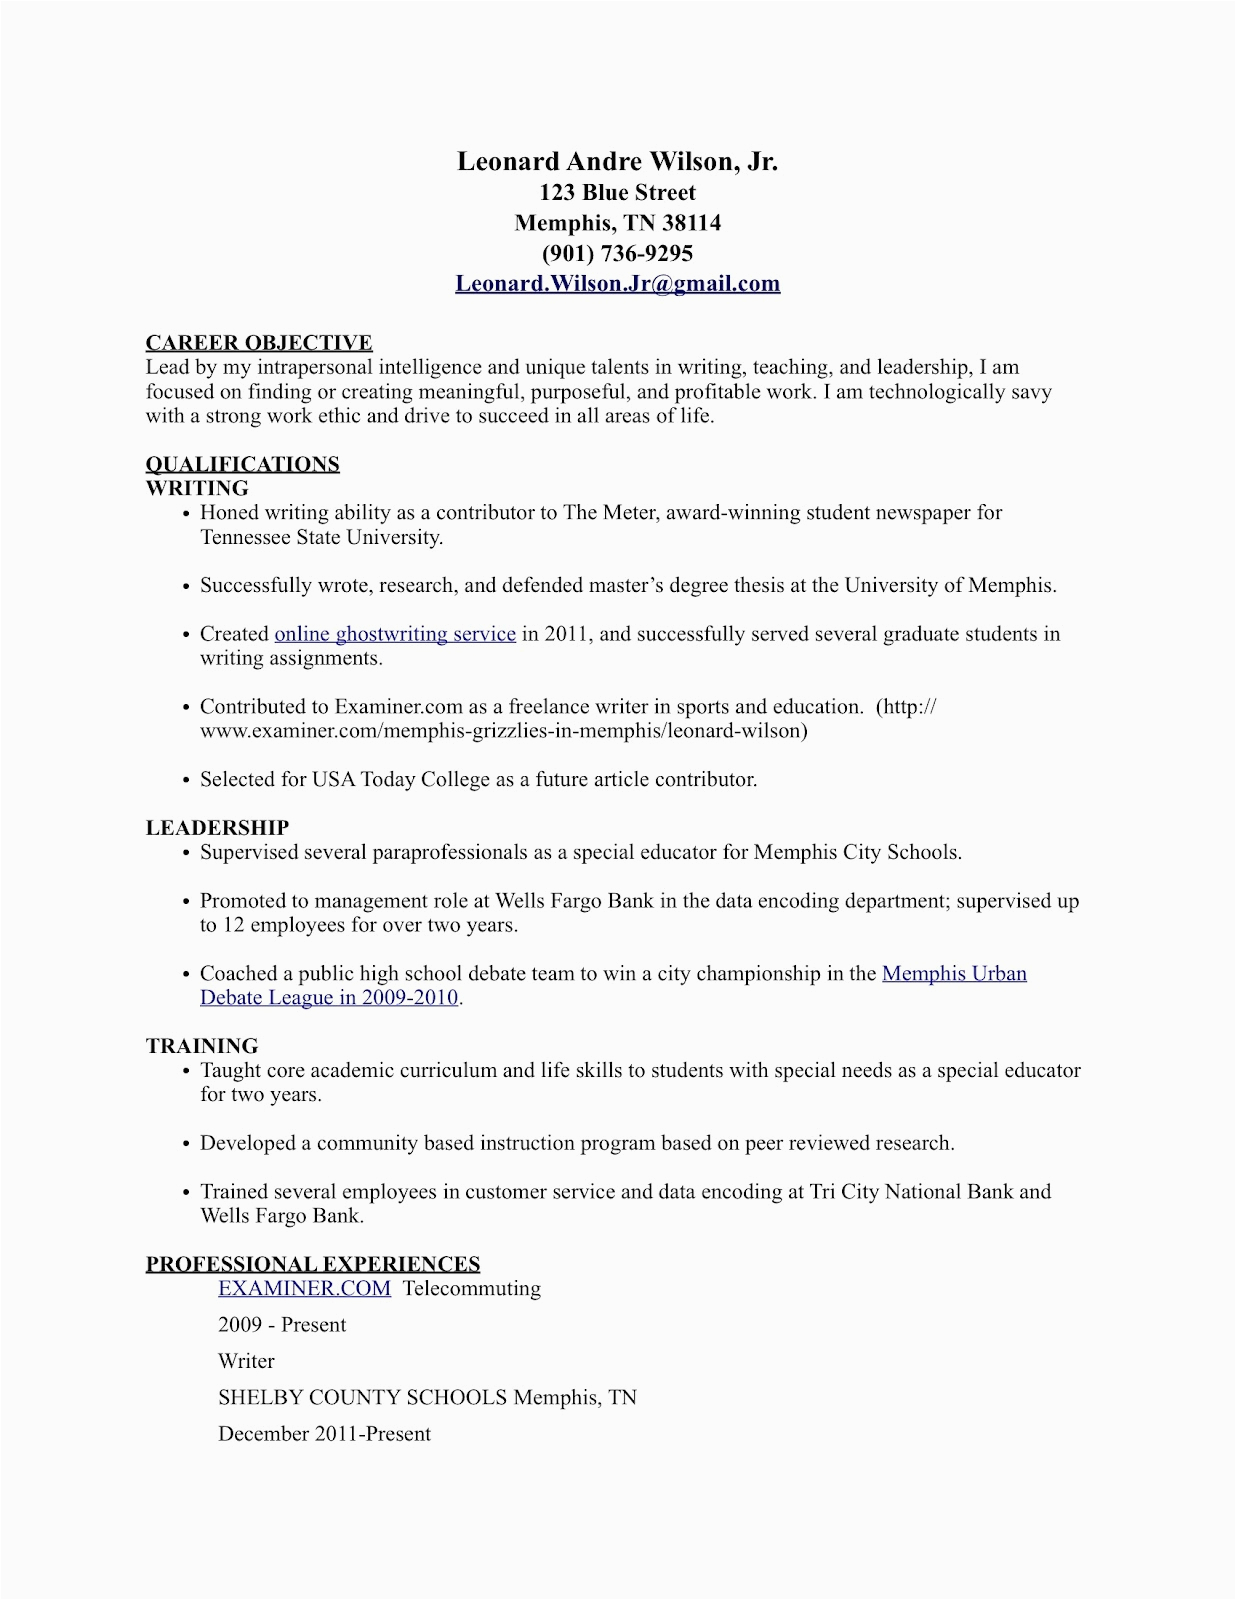 Sample Of Skills and Interest In Resume Following My Passion to Success Career tools Sample